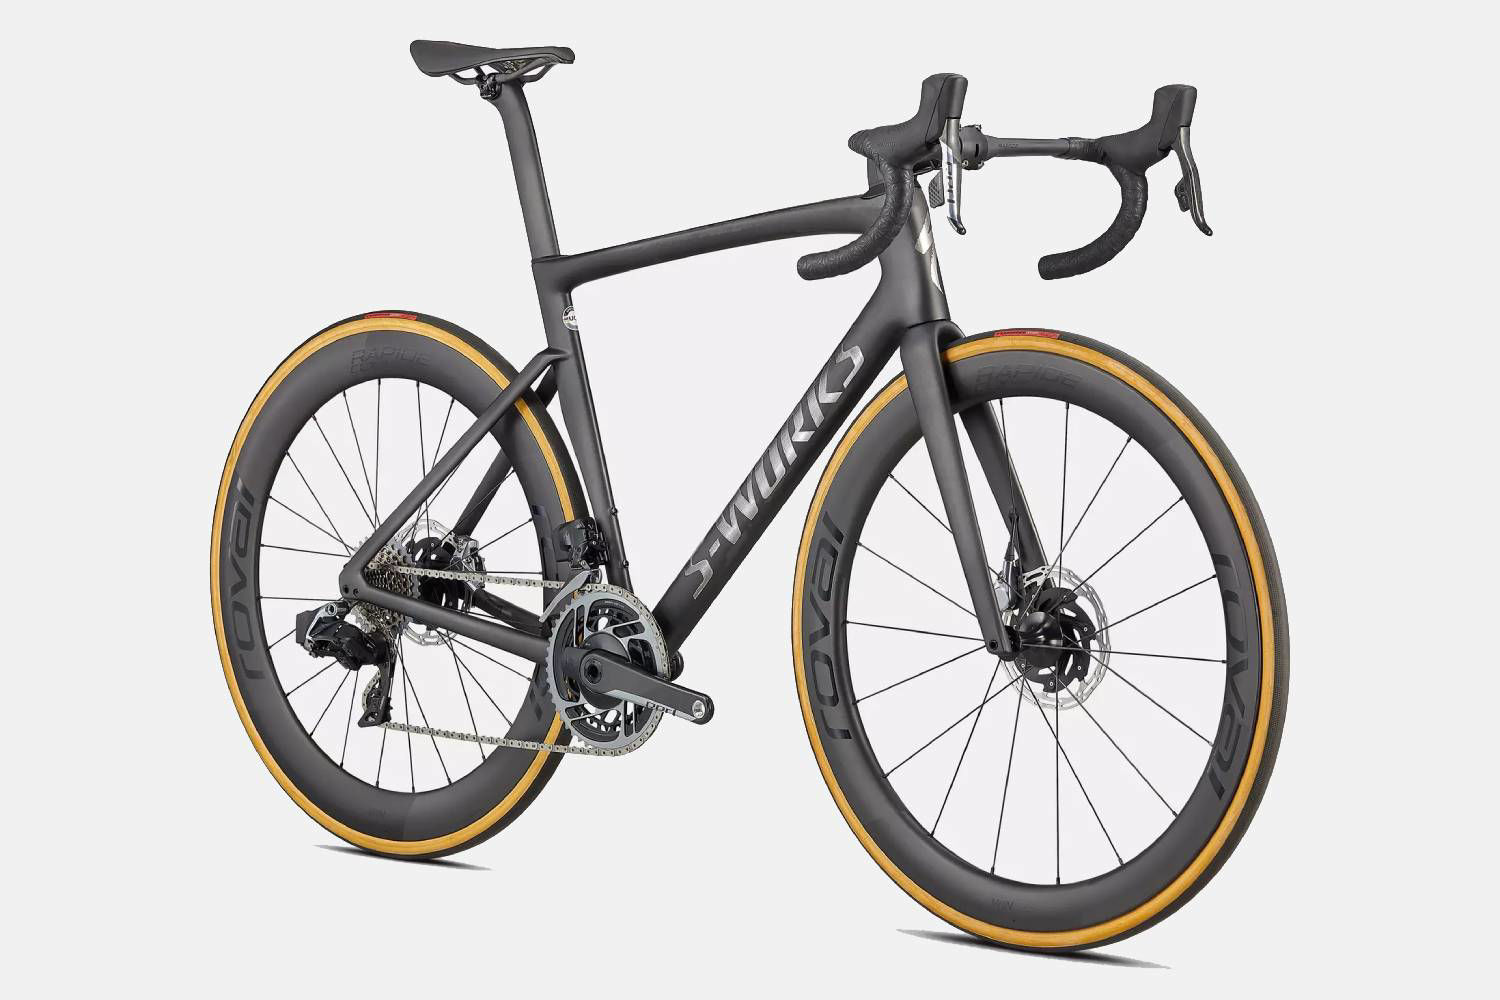 Picture of SPECIALIZED S-Works Tarmac SL7 SRAM Red eTap AXS